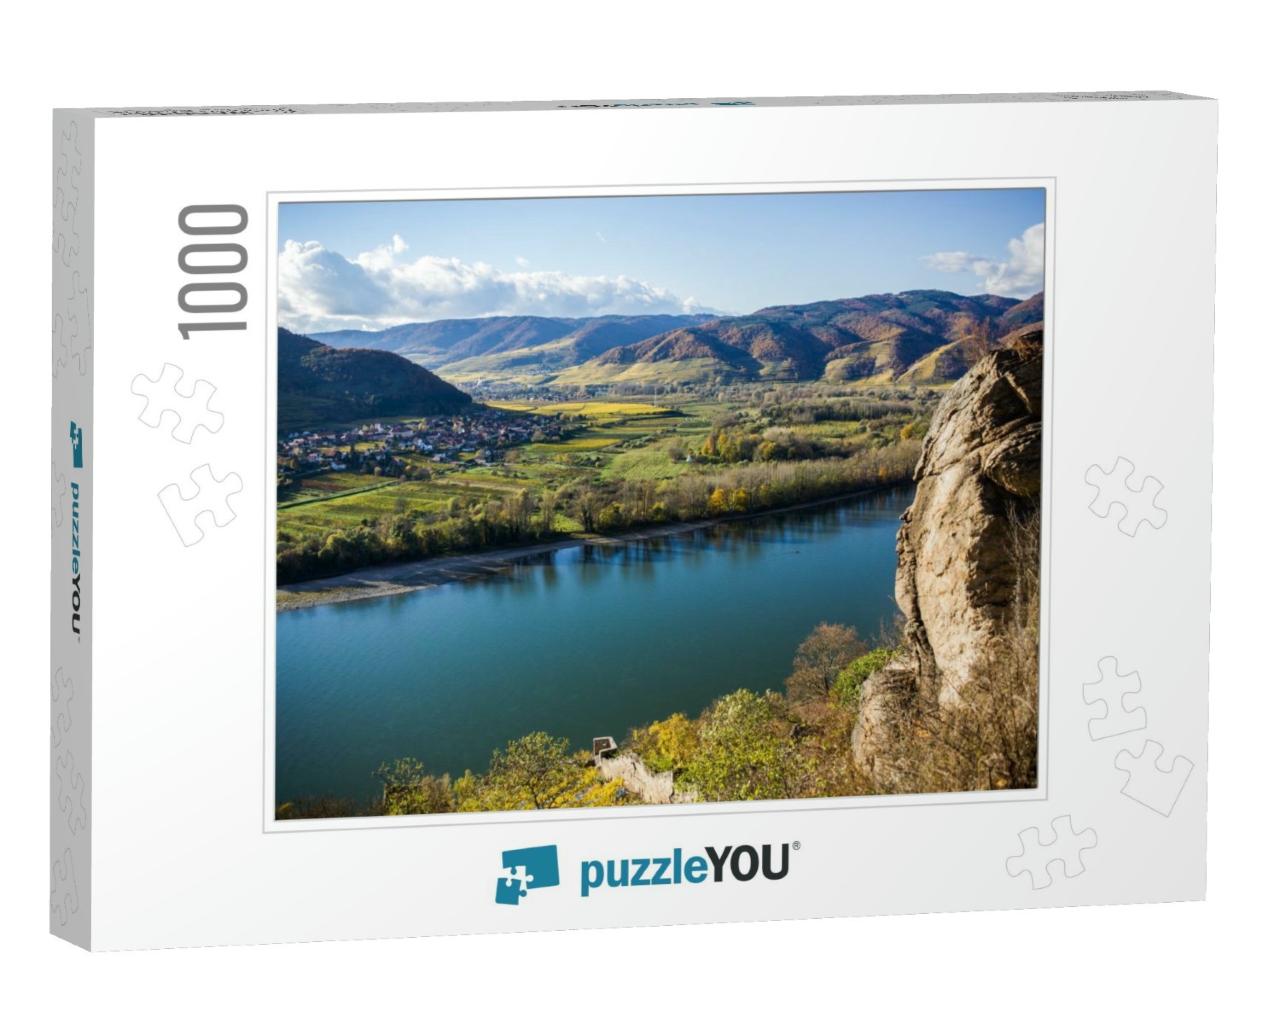 Landscape of Wachau Valley, Danube River, Austria... Jigsaw Puzzle with 1000 pieces